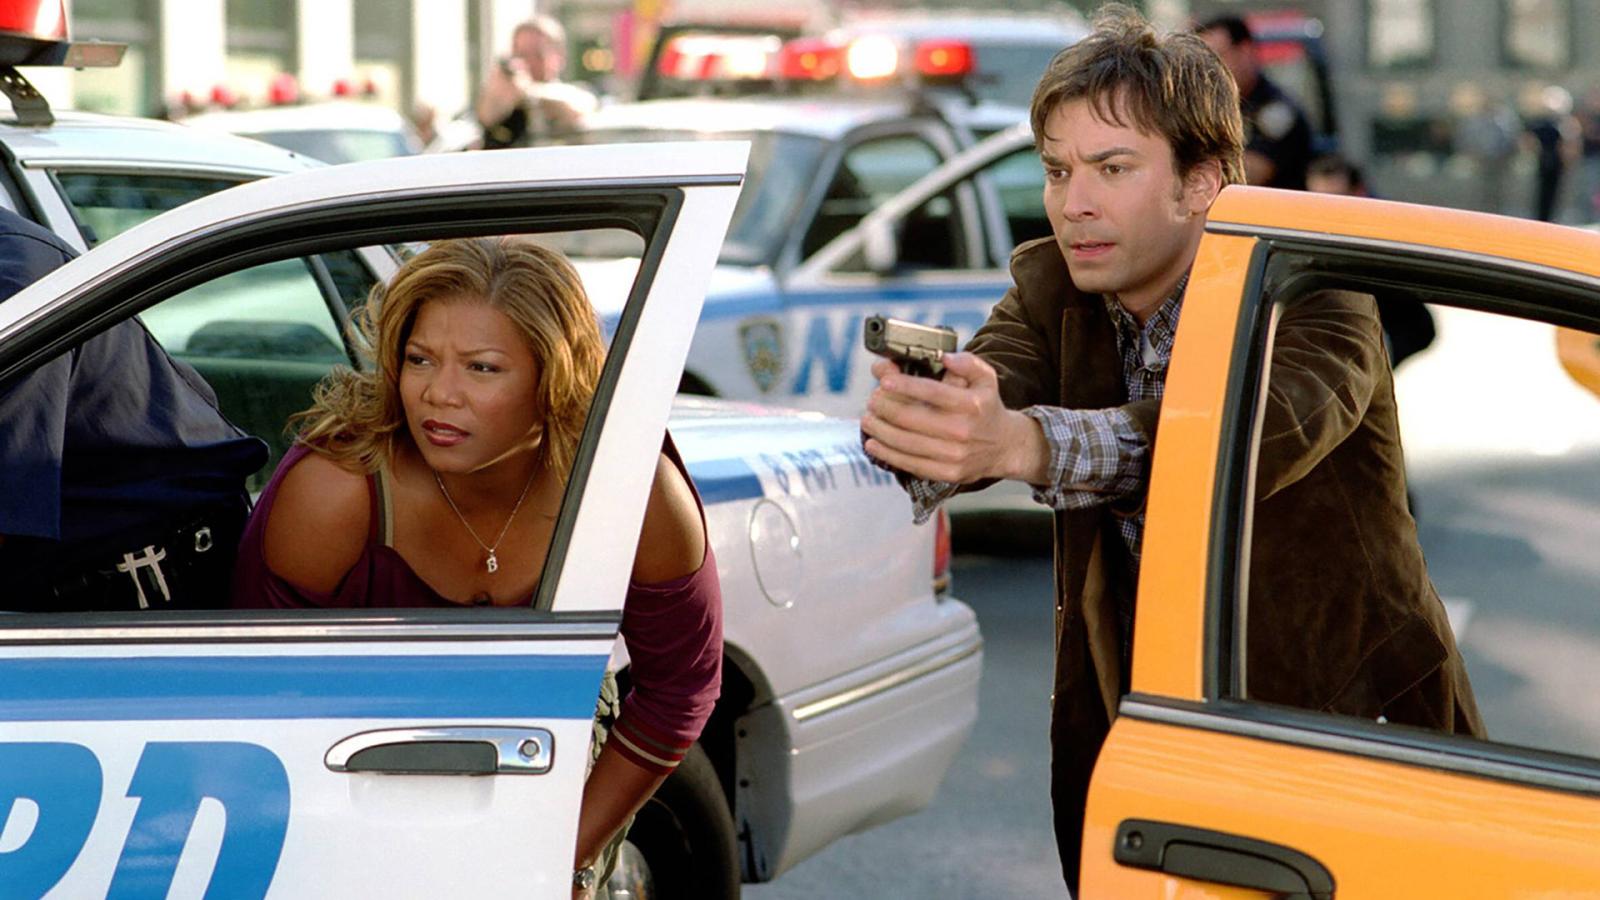 10 Action Comedies from the 2000s That Are Seriously Underrated - image 4